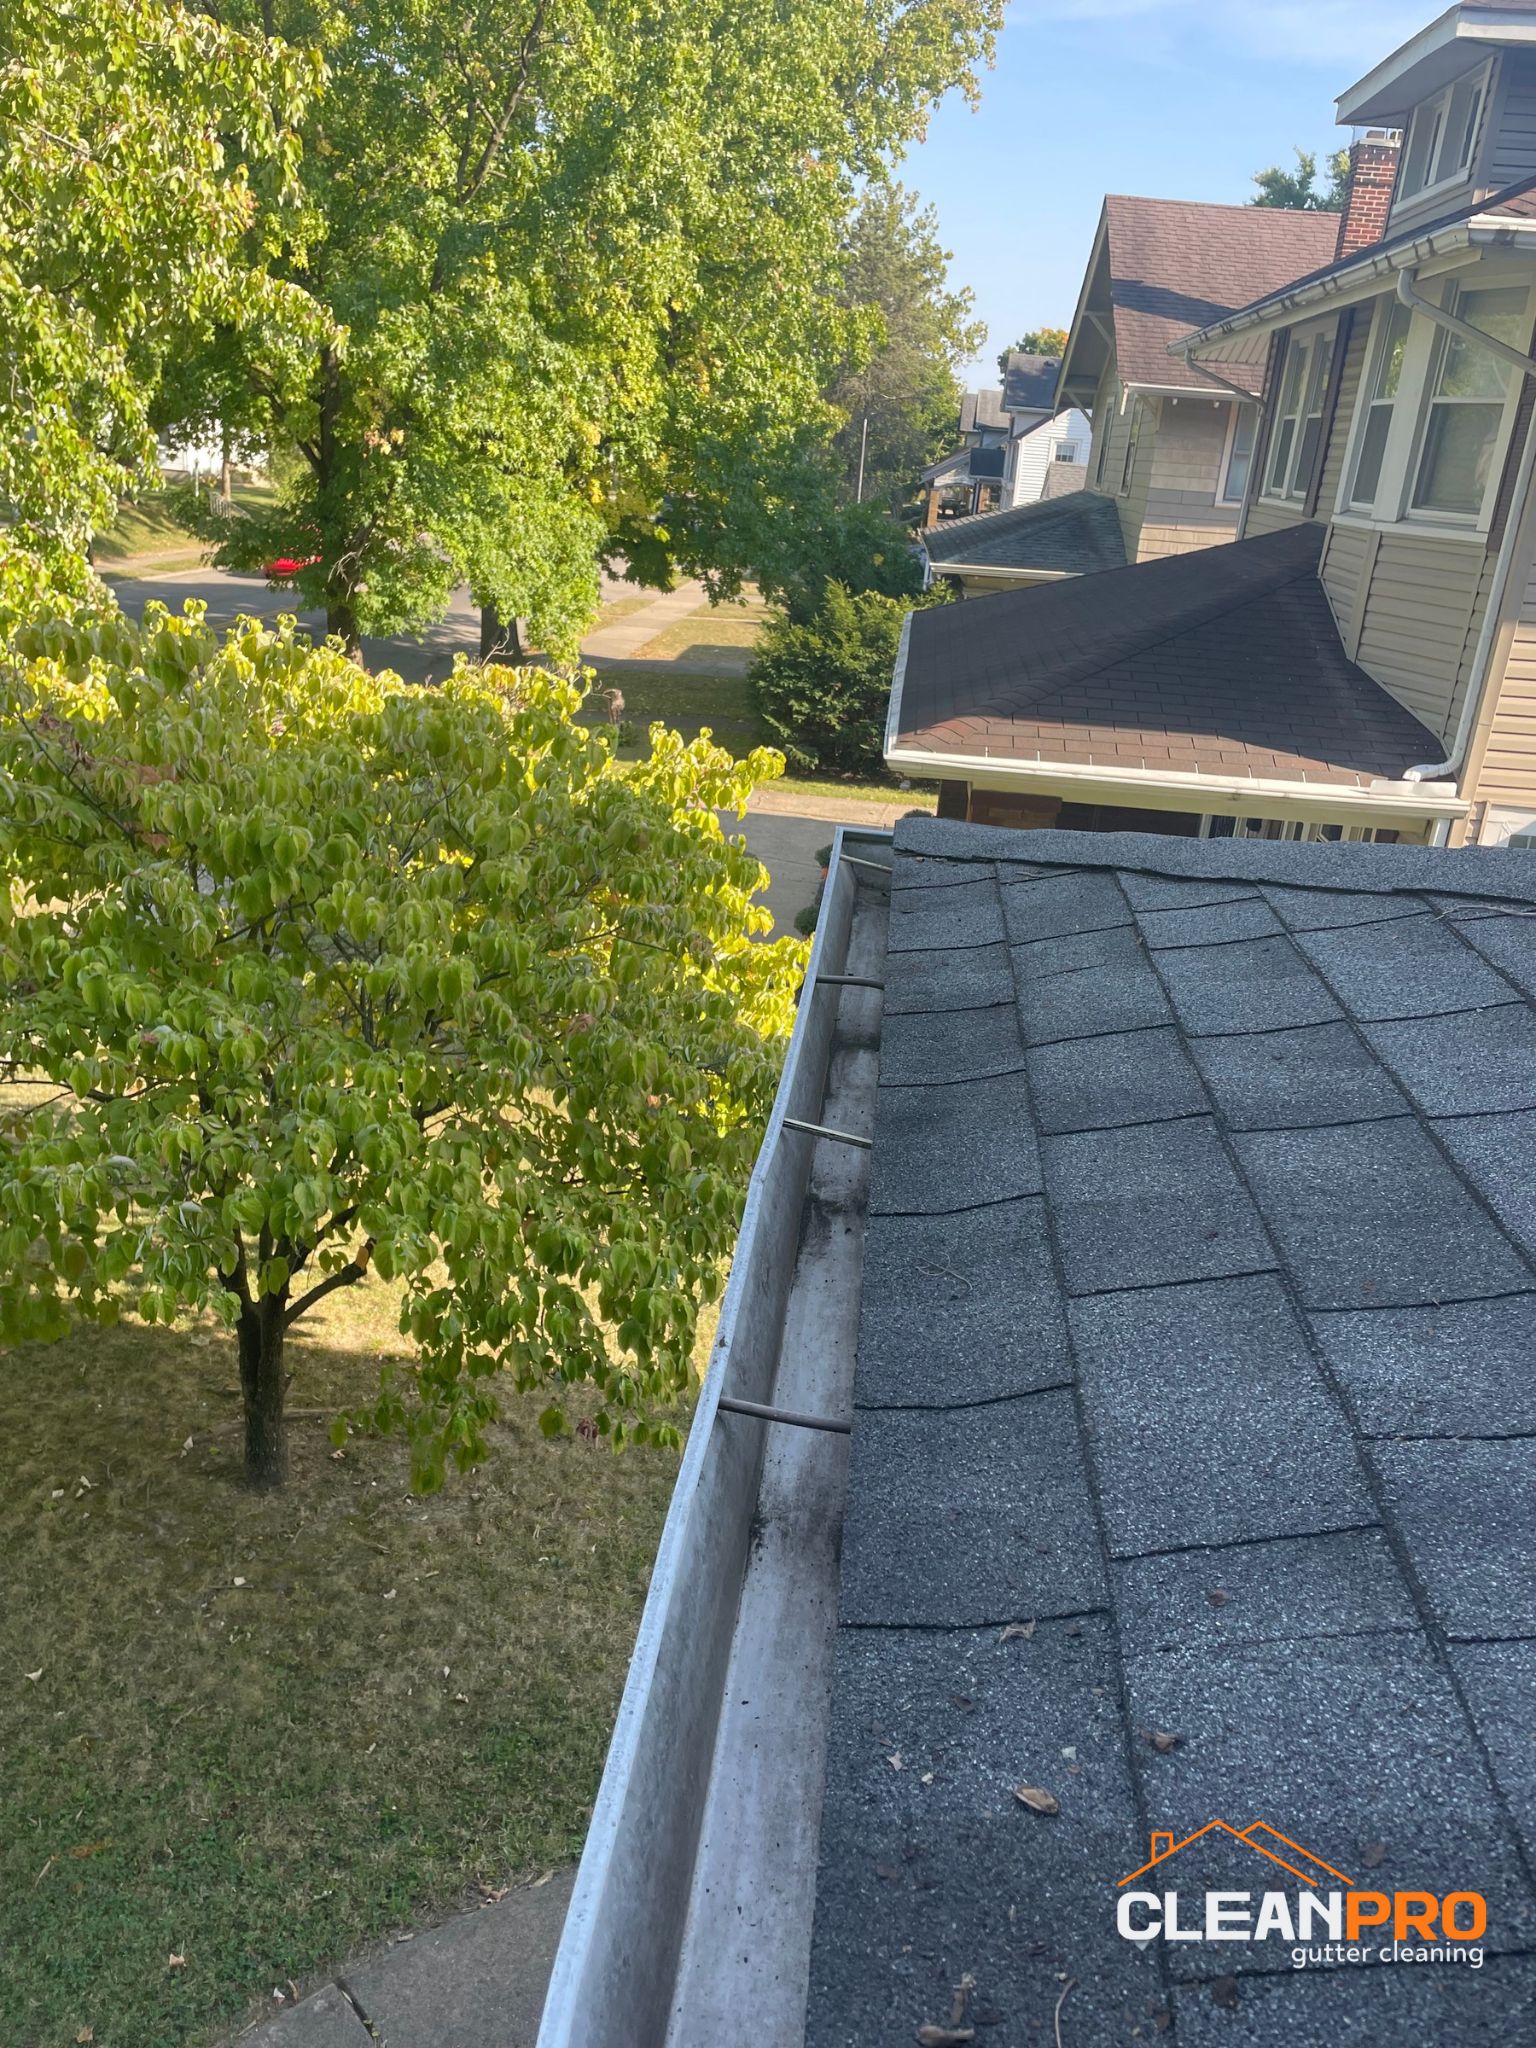 Top Notch Gutter Cleaning Service in Baltimore